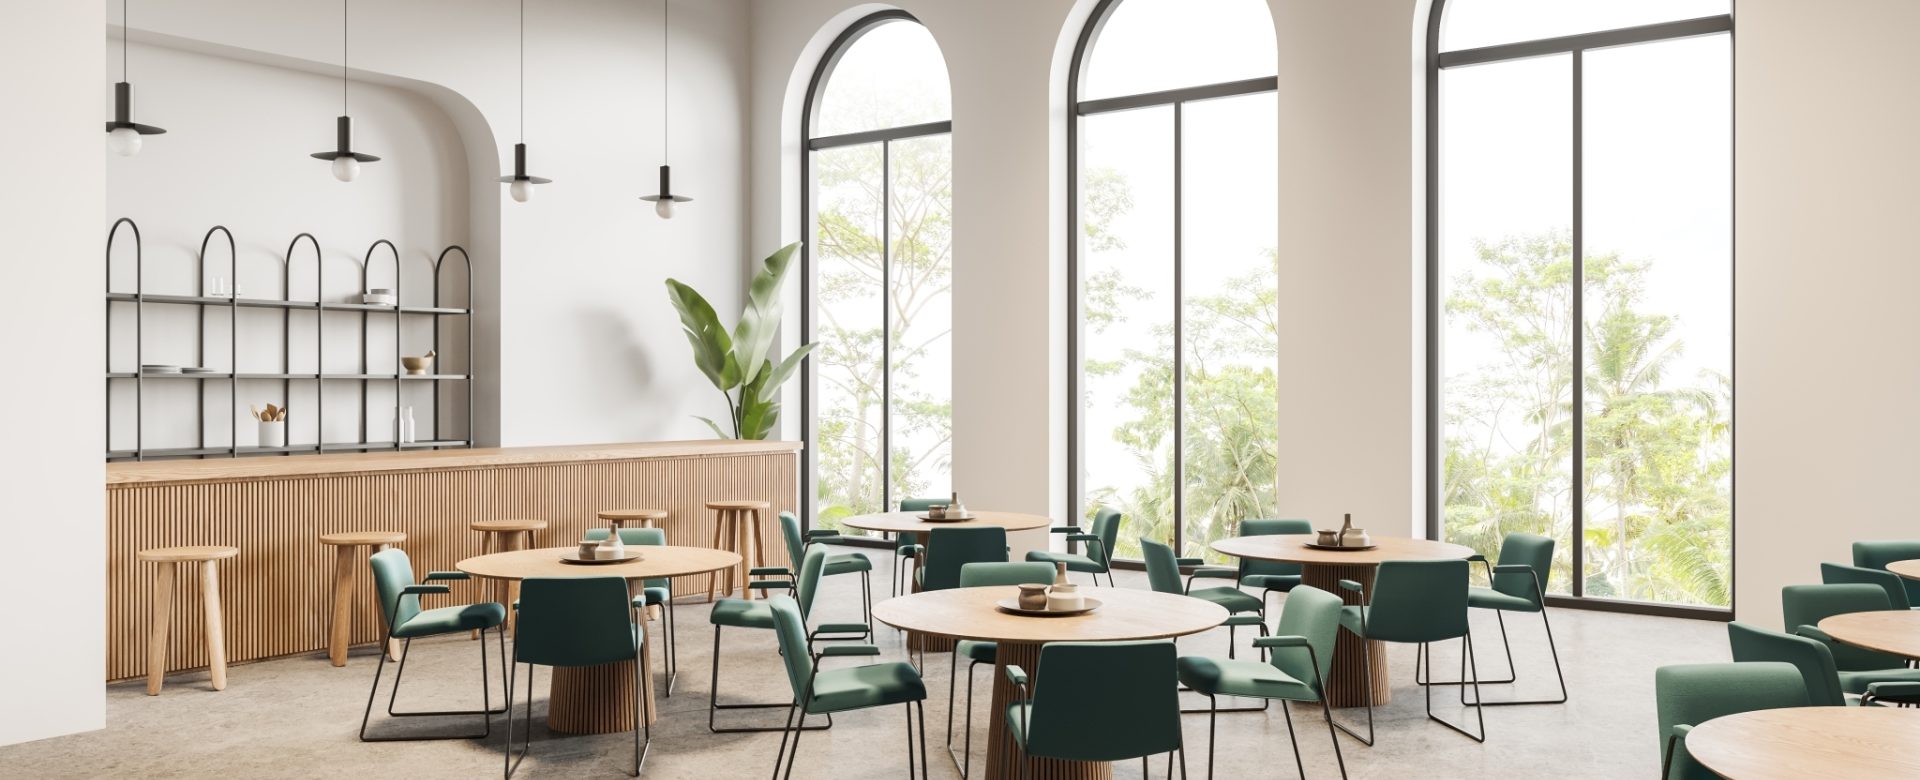 Large, arched windows in a commercial cafe setting.